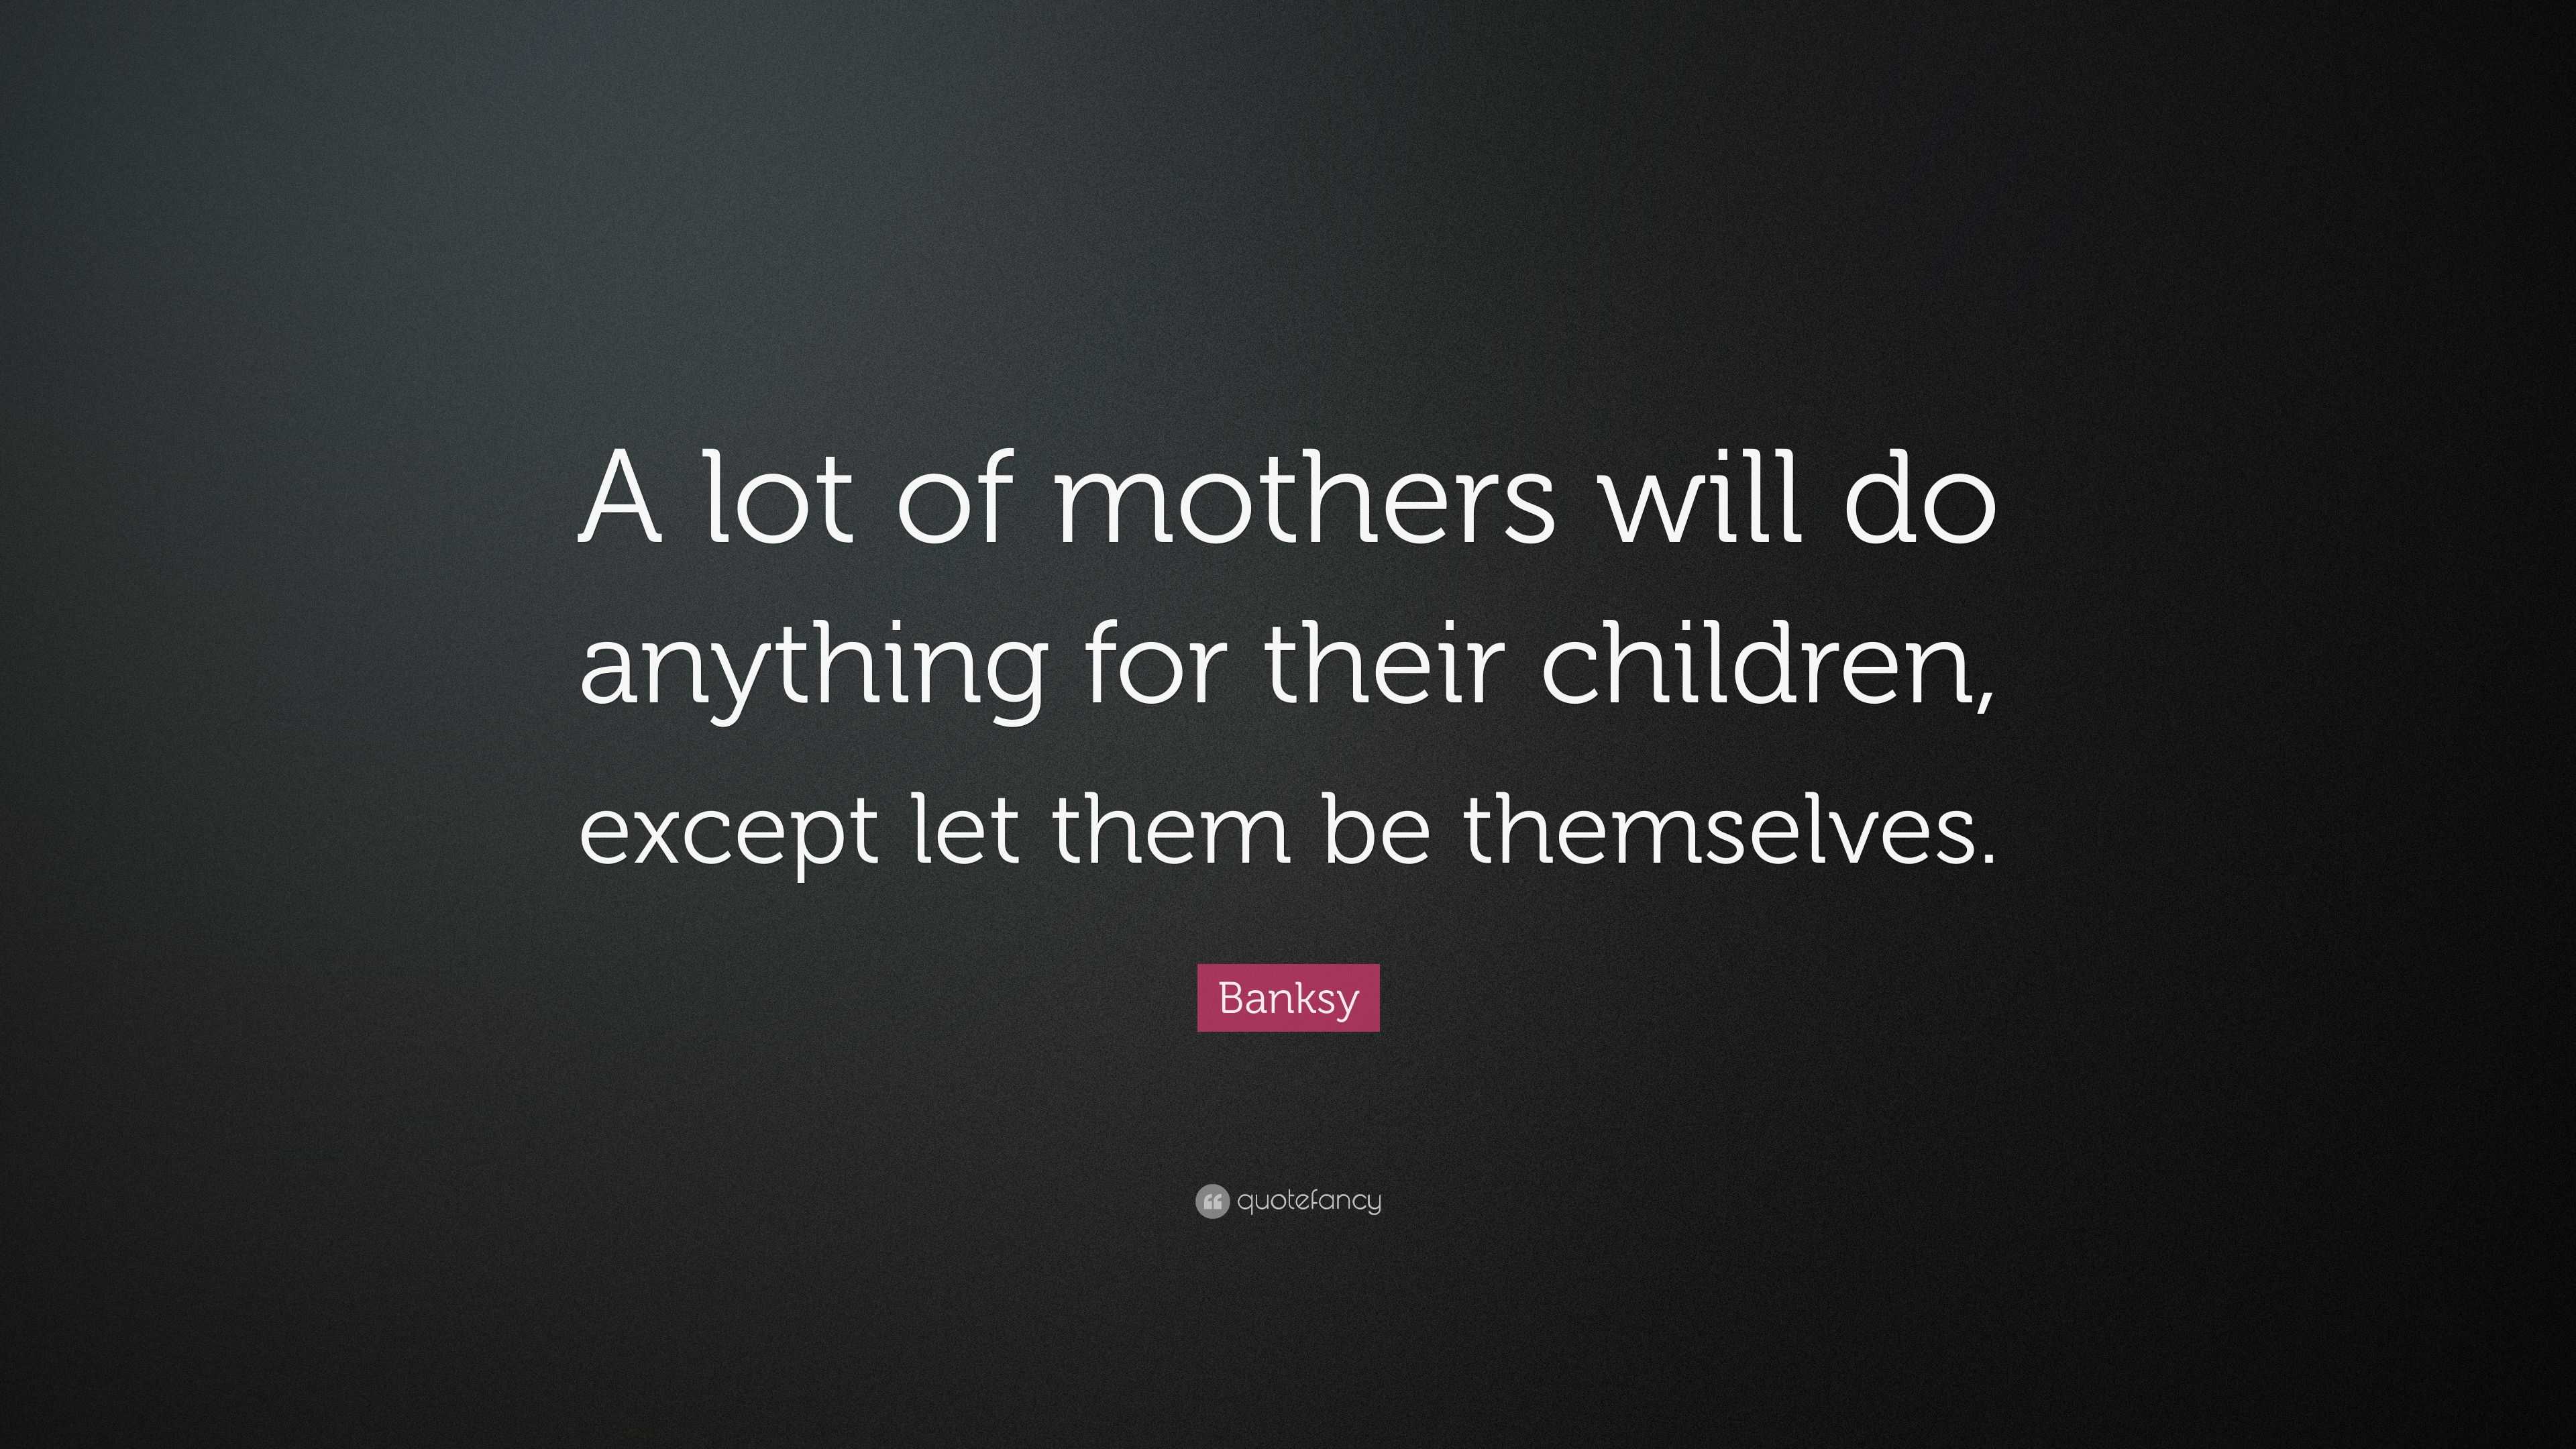 Banksy Quote: “A lot of mothers will do anything for their children ...